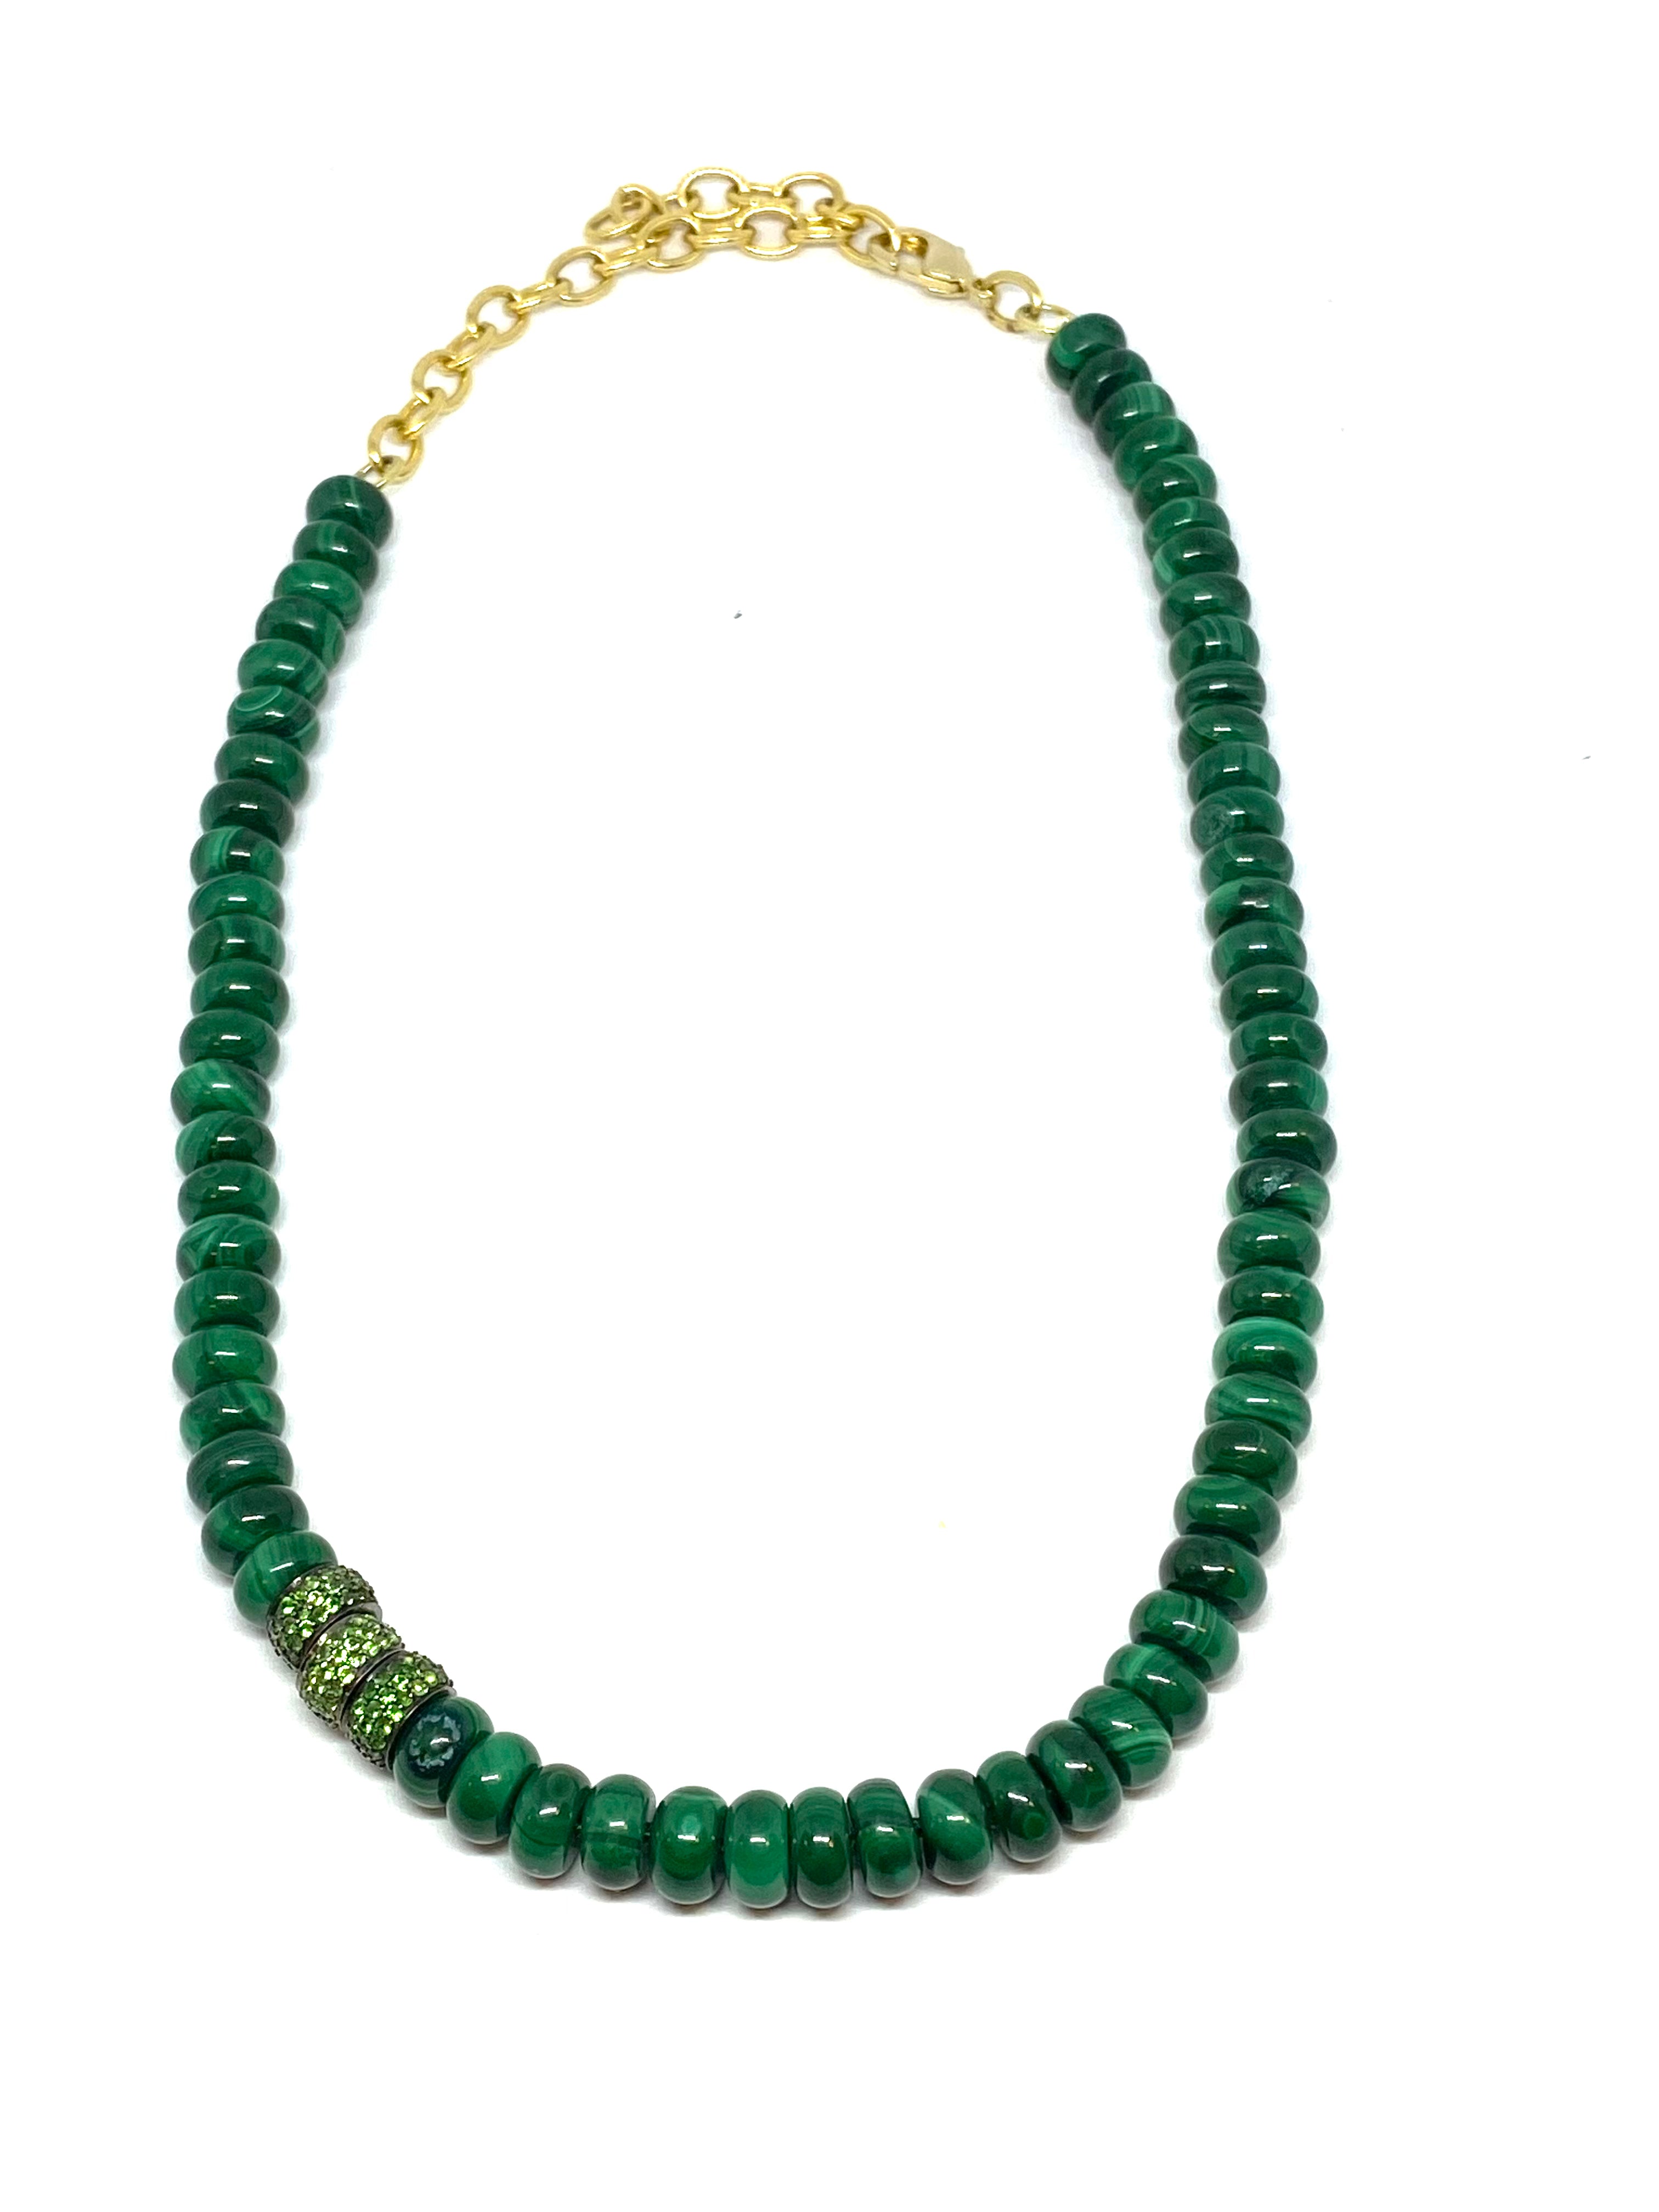 Nathan and Moe 16" malachite rondelle necklace with three tsavorite rondelles found at Patricia in southern pines, nc